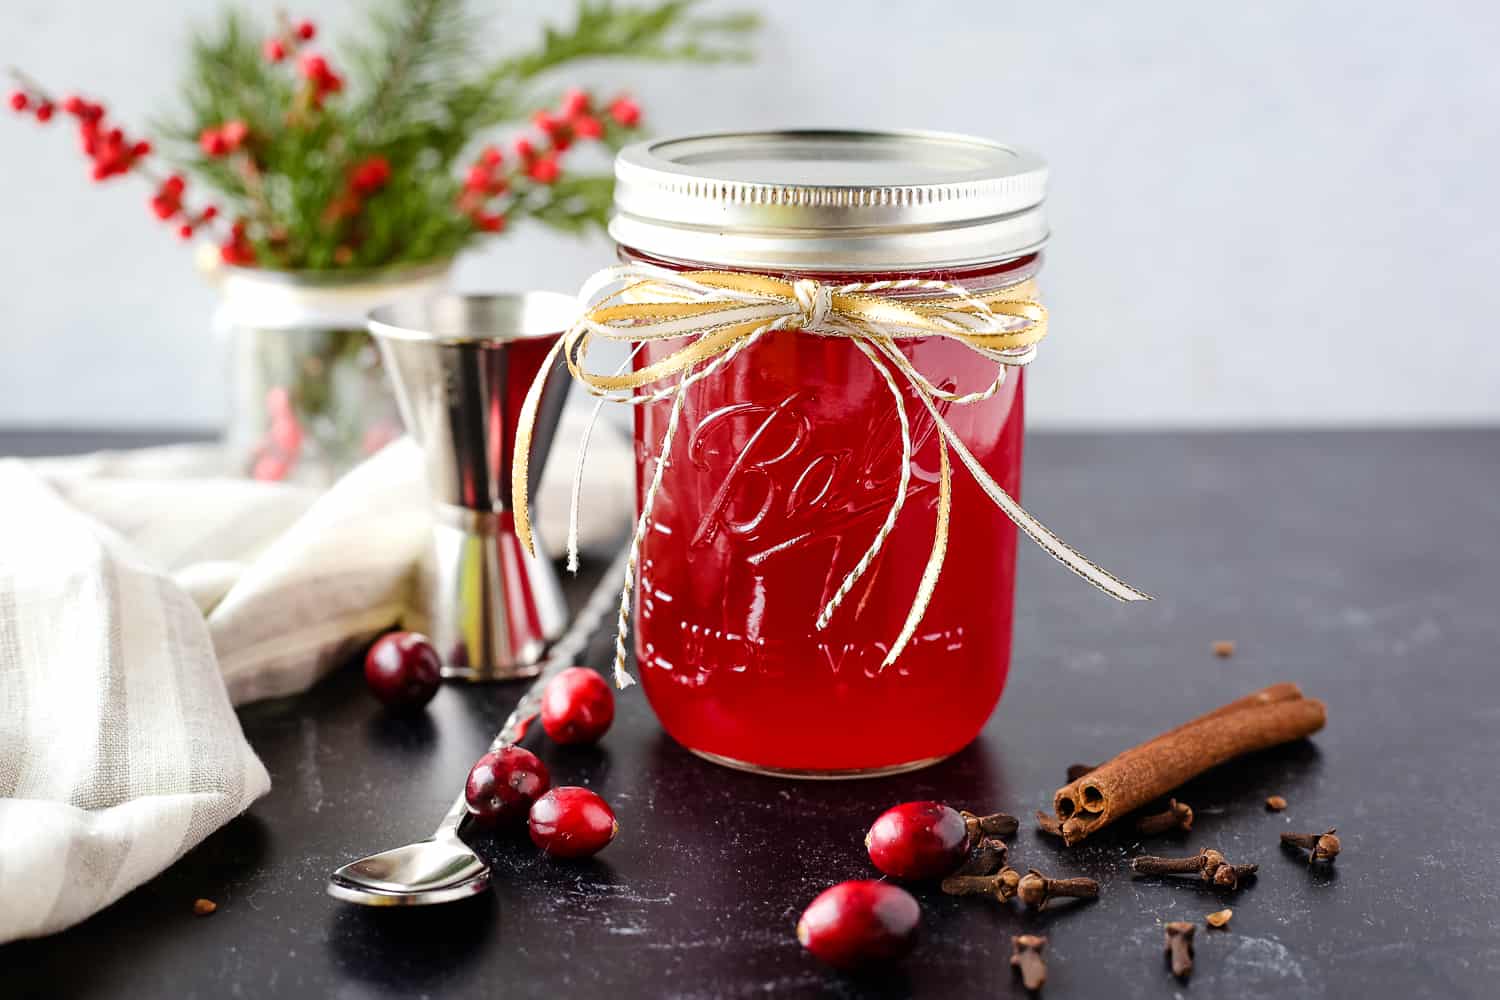 A glass mason jar filled to the top with a vibrant red spiced cranberry simple syrup is decorated with seasonal ribbon and displayed with a silver bar spoon and jigger